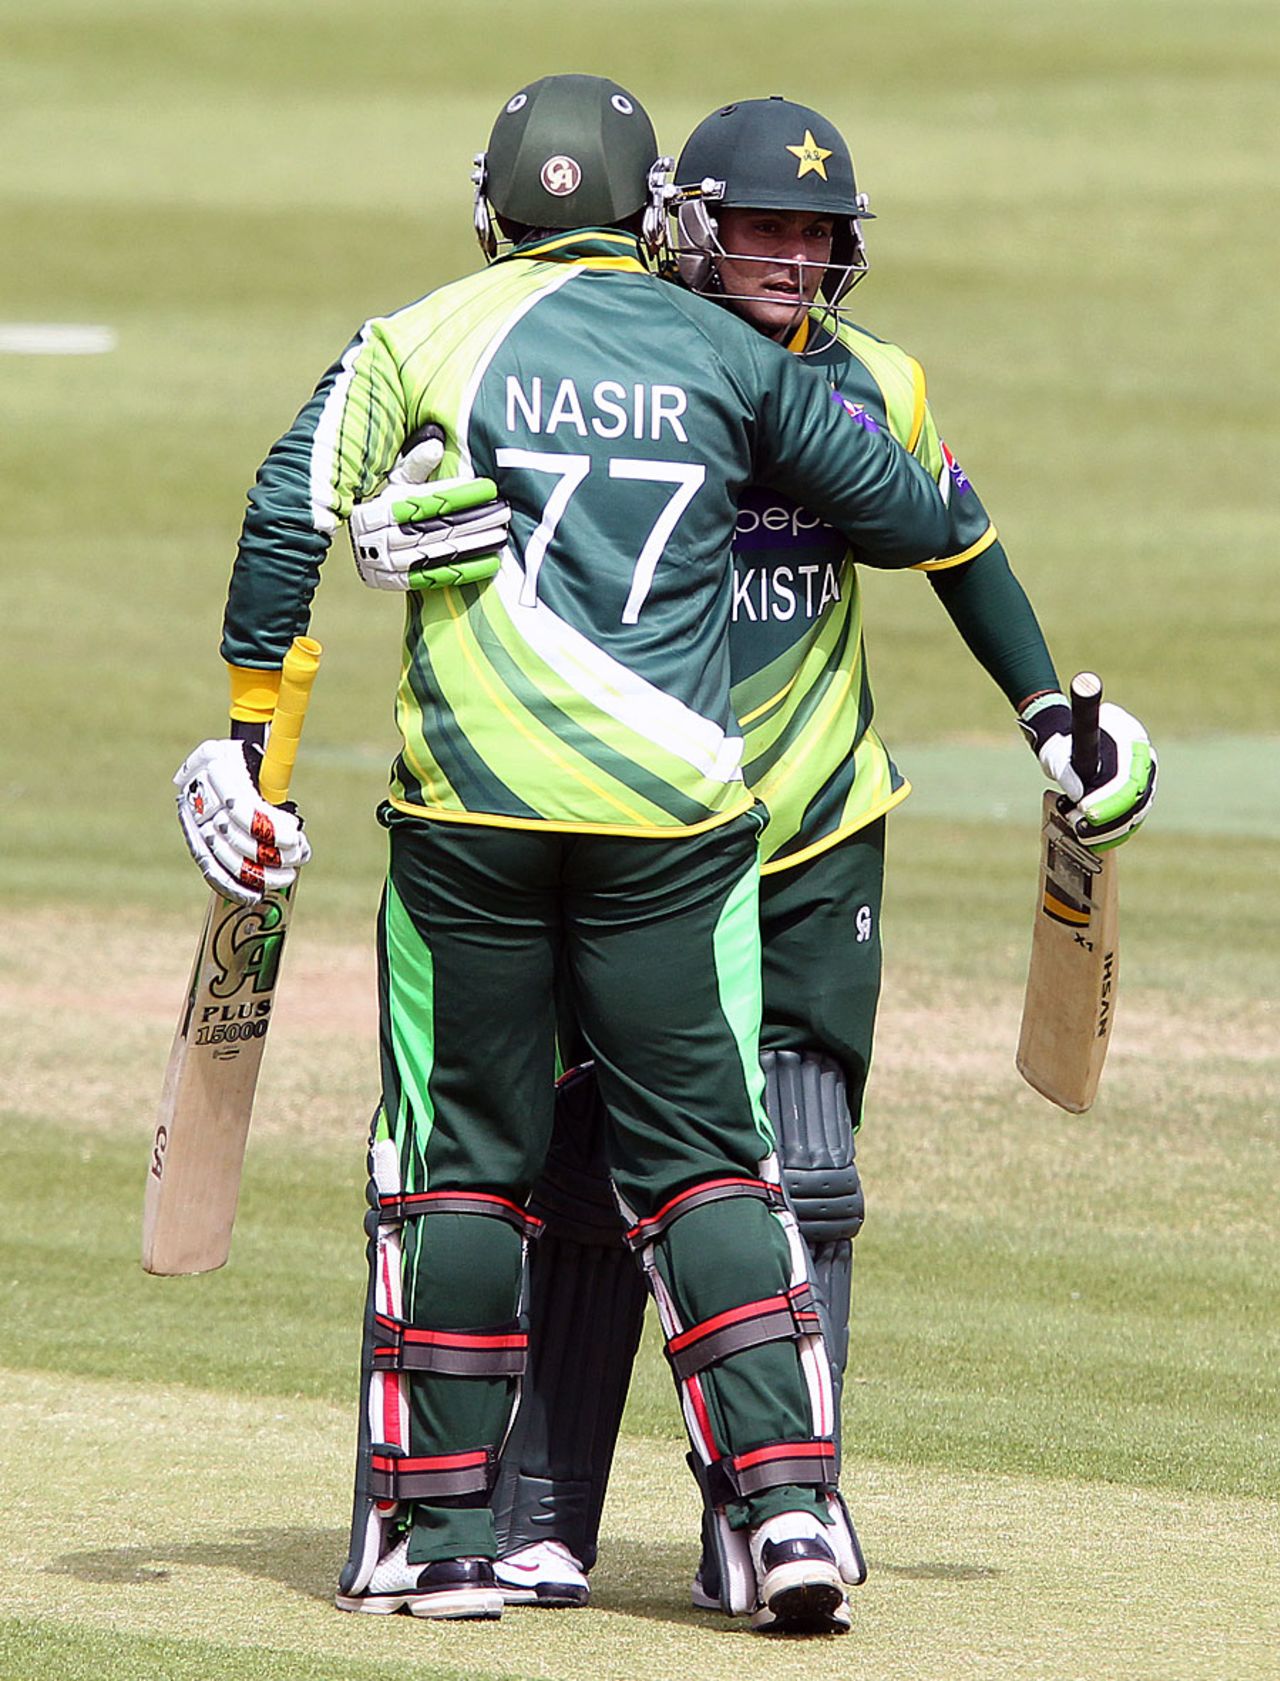 Mohammad Hafeez is congratulated by Nasir Jamshed on his century, Ireland v Pakistan, 1st ODI, Dublin, May 23, 2013